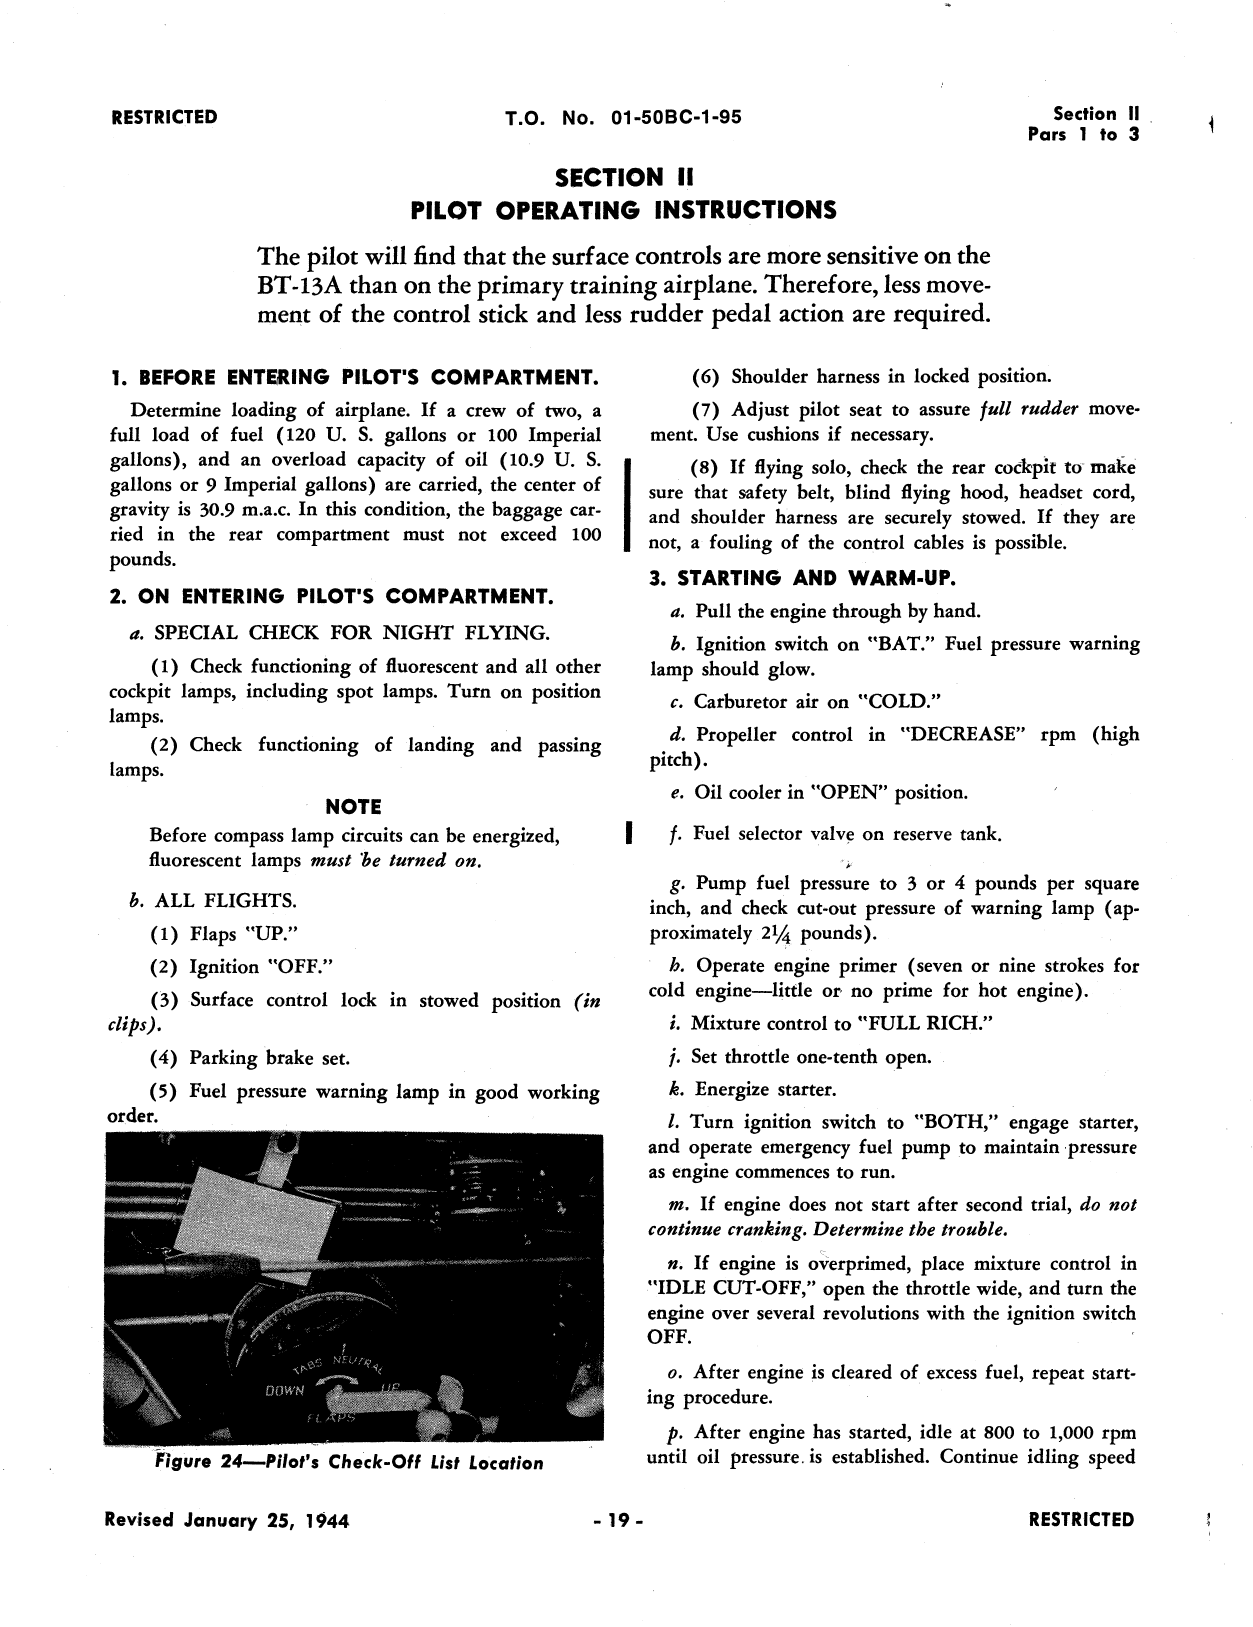 Sample page 24 from AirCorps Library document: Pilot Training Manual for the BT-13